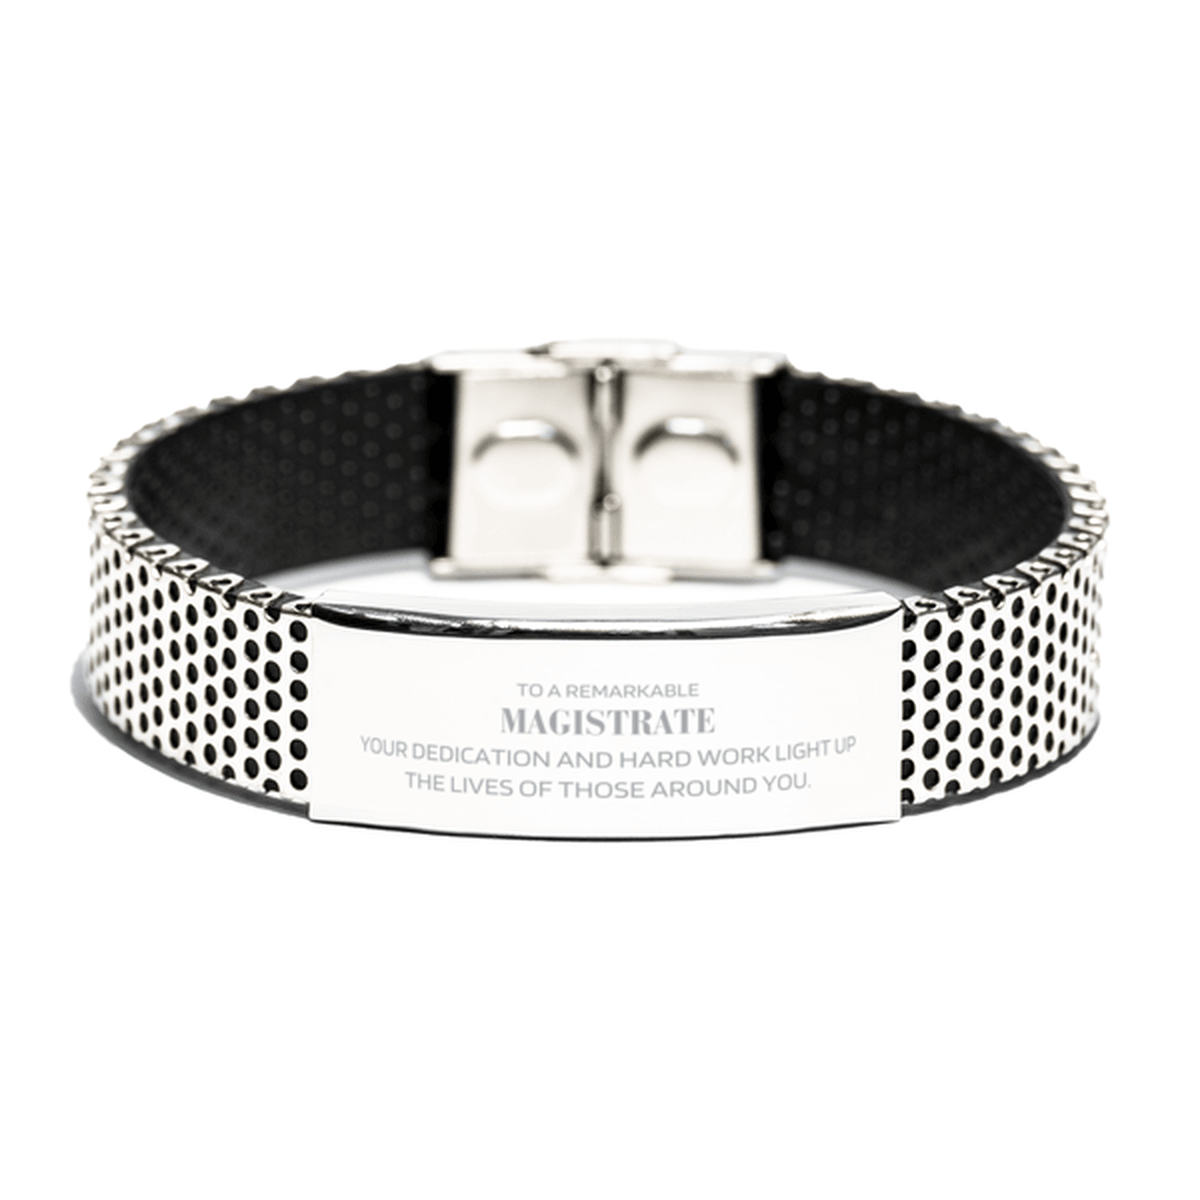 Remarkable Magistrate Gifts, Your dedication and hard work, Inspirational Birthday Christmas Unique Stainless Steel Bracelet For Magistrate, Coworkers, Men, Women, Friends - Mallard Moon Gift Shop